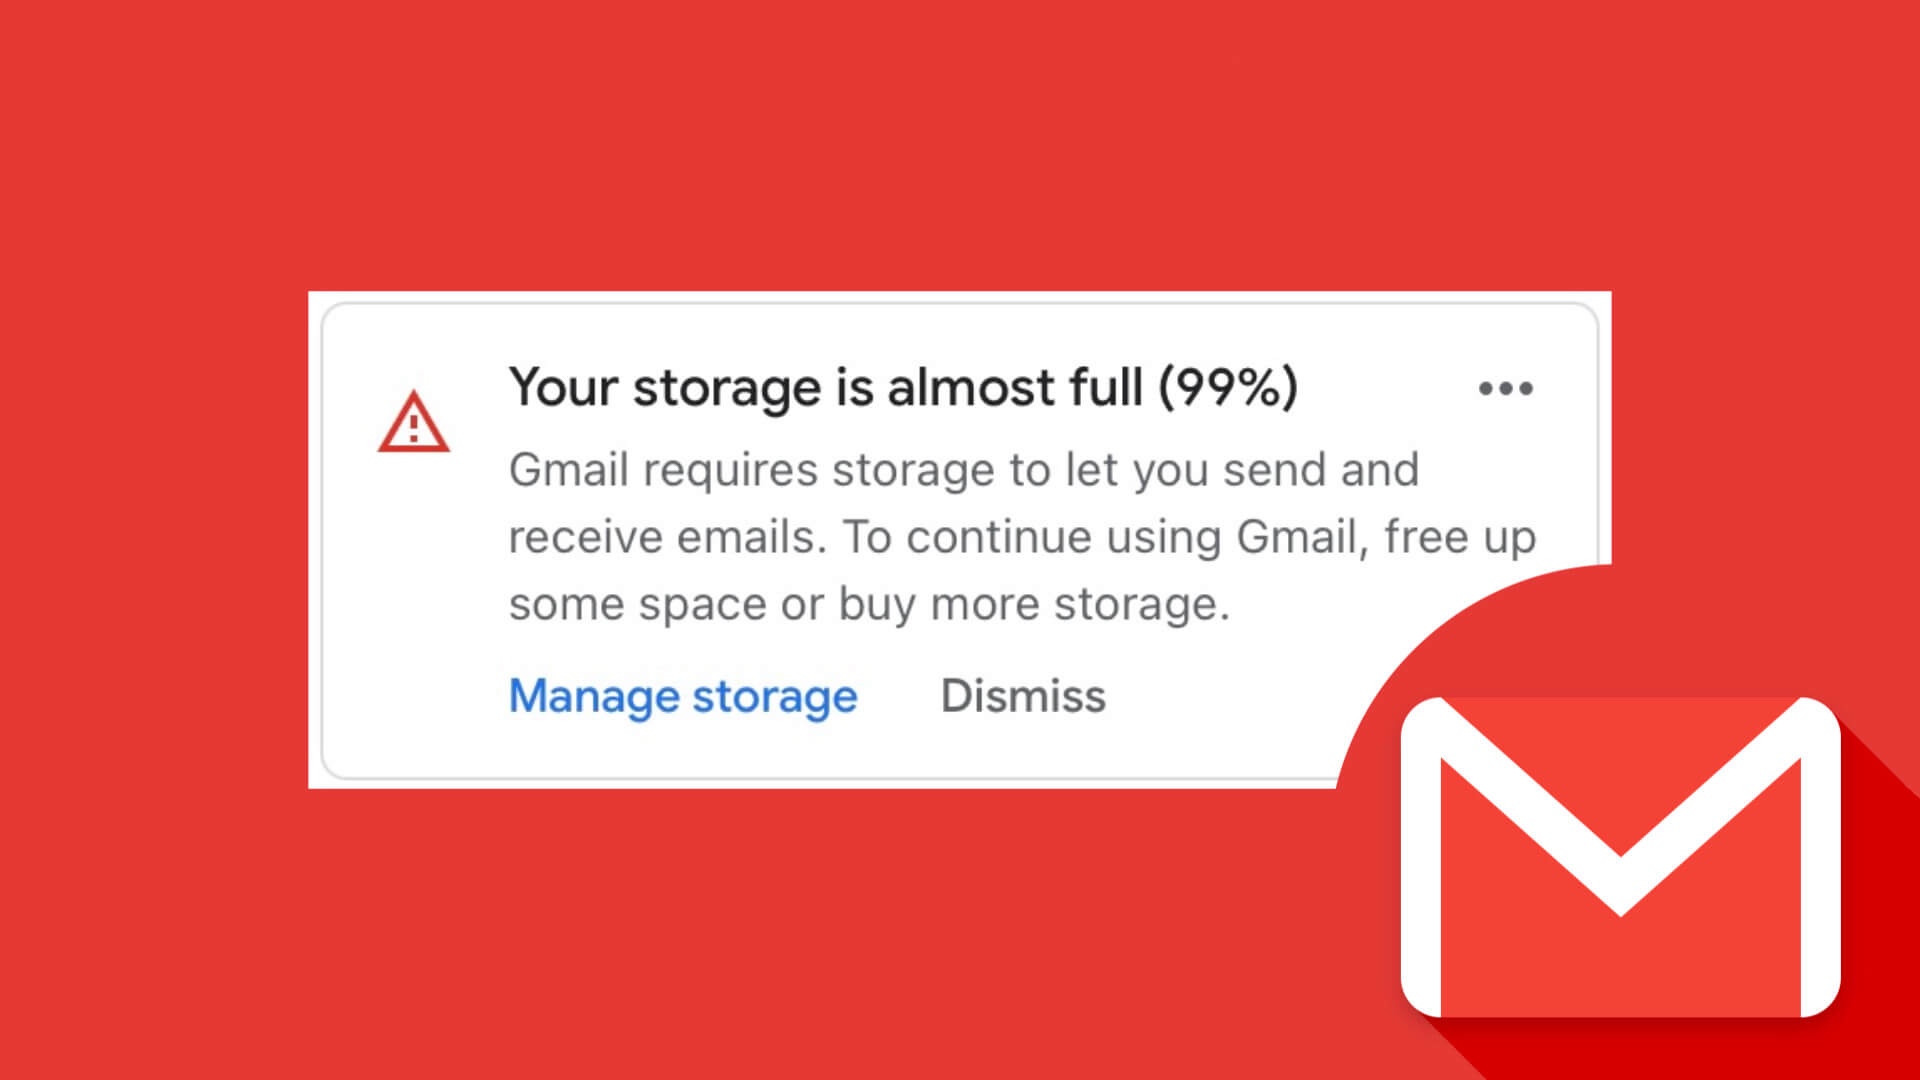 How To Get More Storage For Your Gmail Account